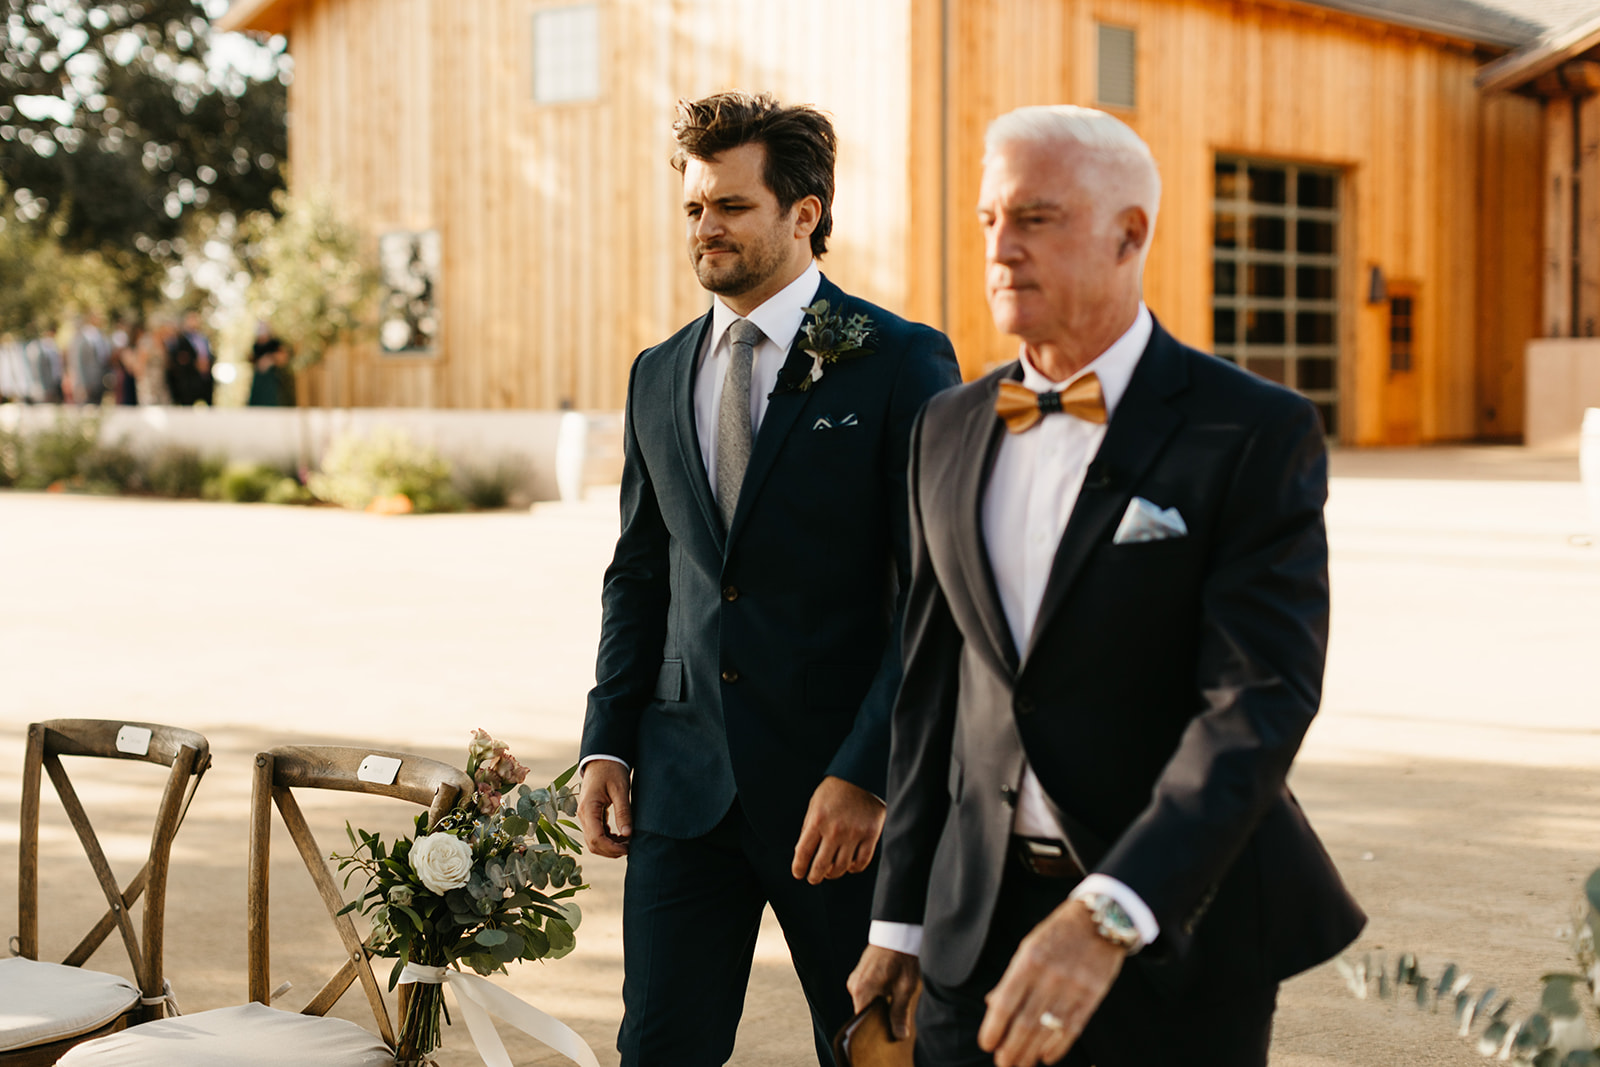 groom walking down aisle with officiant for wedding